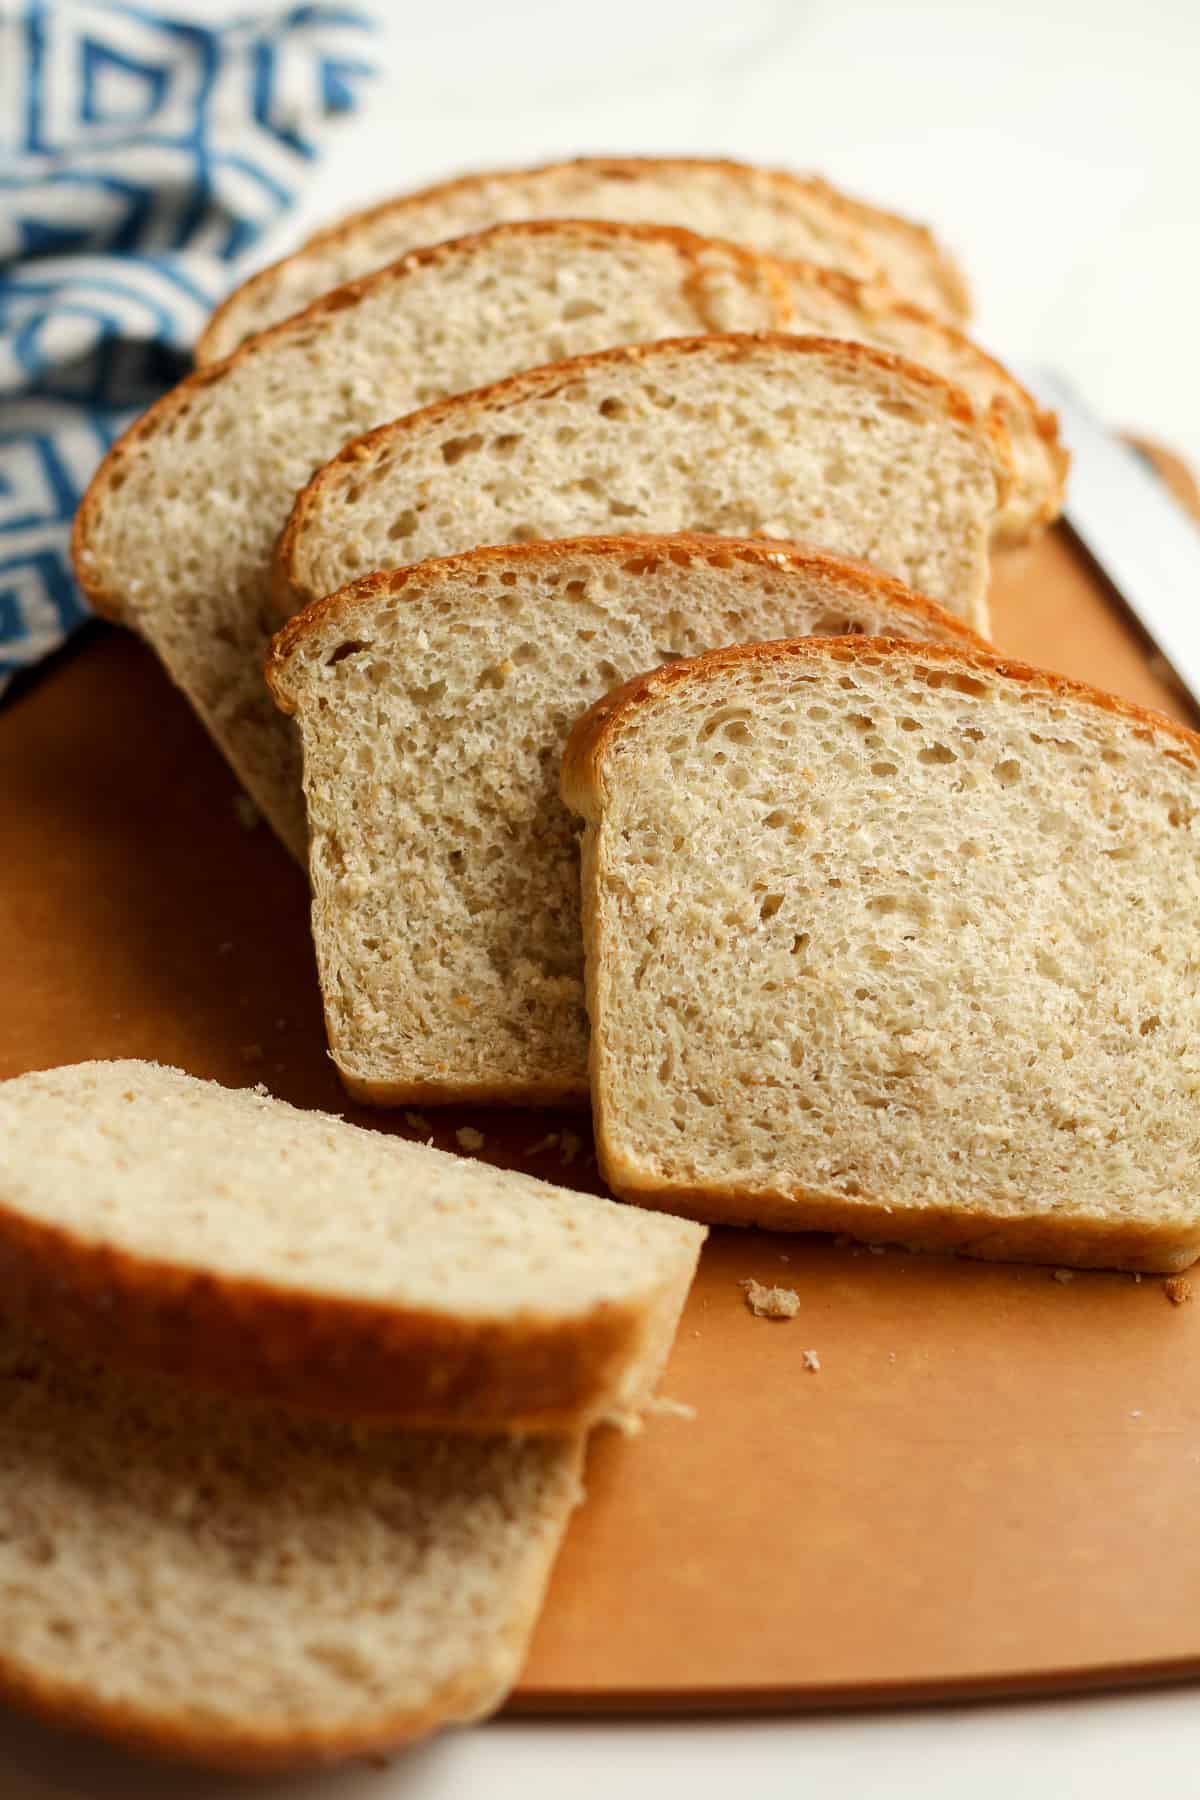 Side view of some sliced cracked wheat bread, on a cutting board.